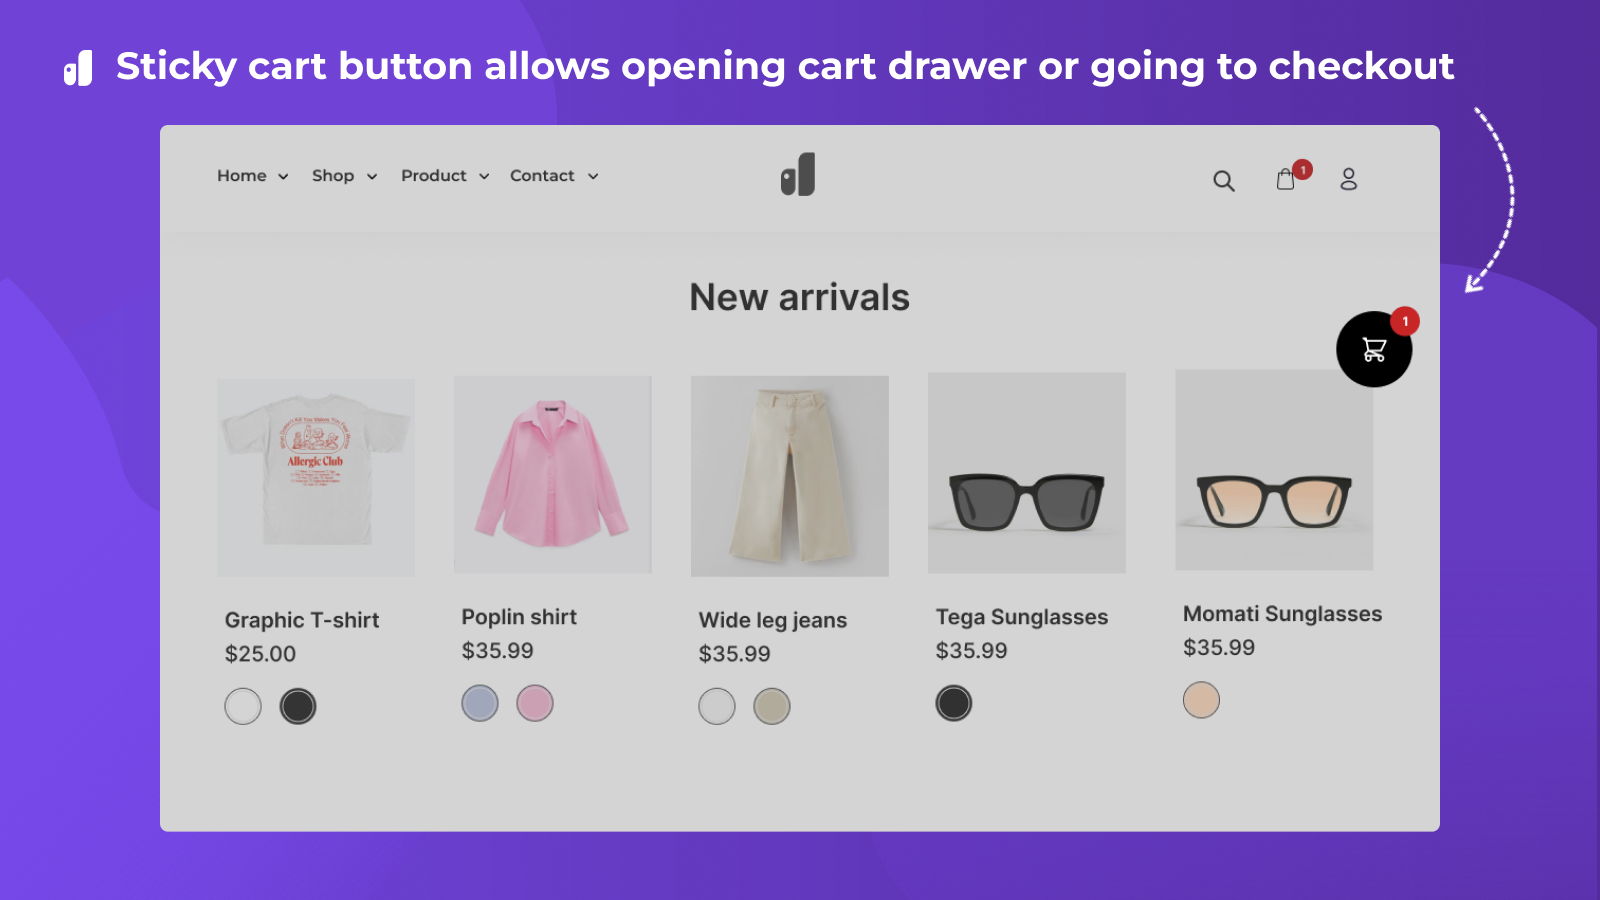 Sticky cart button allows opening cart draw or going to checkout